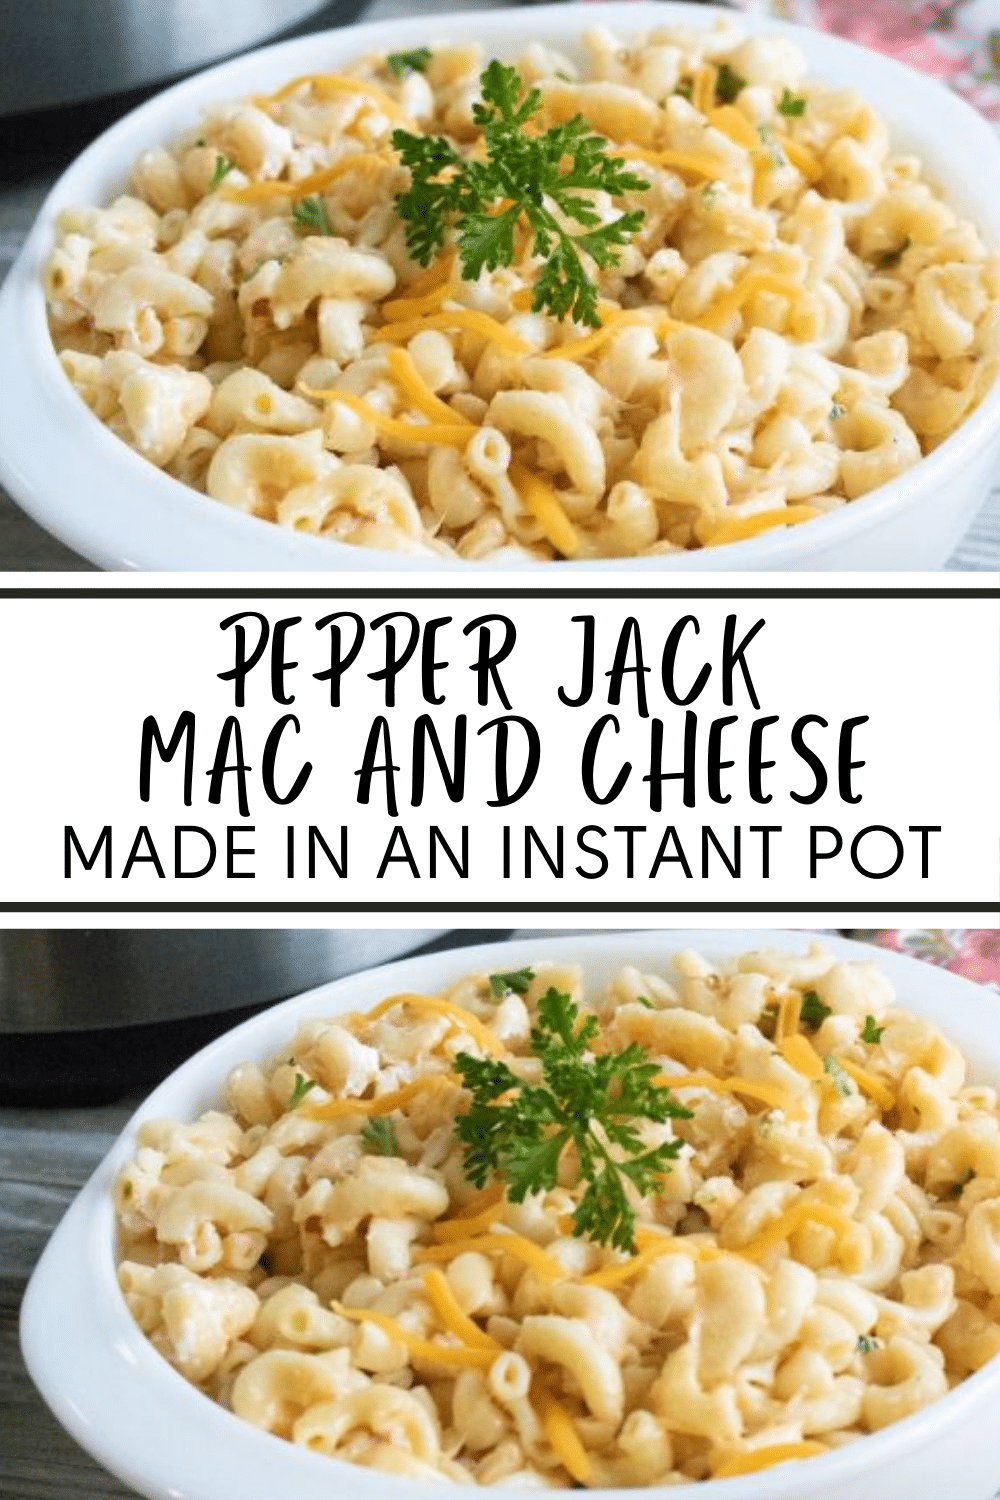 Family mealtimes are so incredibly important This Instant Pot Pepper Jack Mac and Cheese is the perfect meal to serve at the end of a busy day. #instantpot #pressurecooker #macandcheese #dinnerrecipe via @wondermomwannab